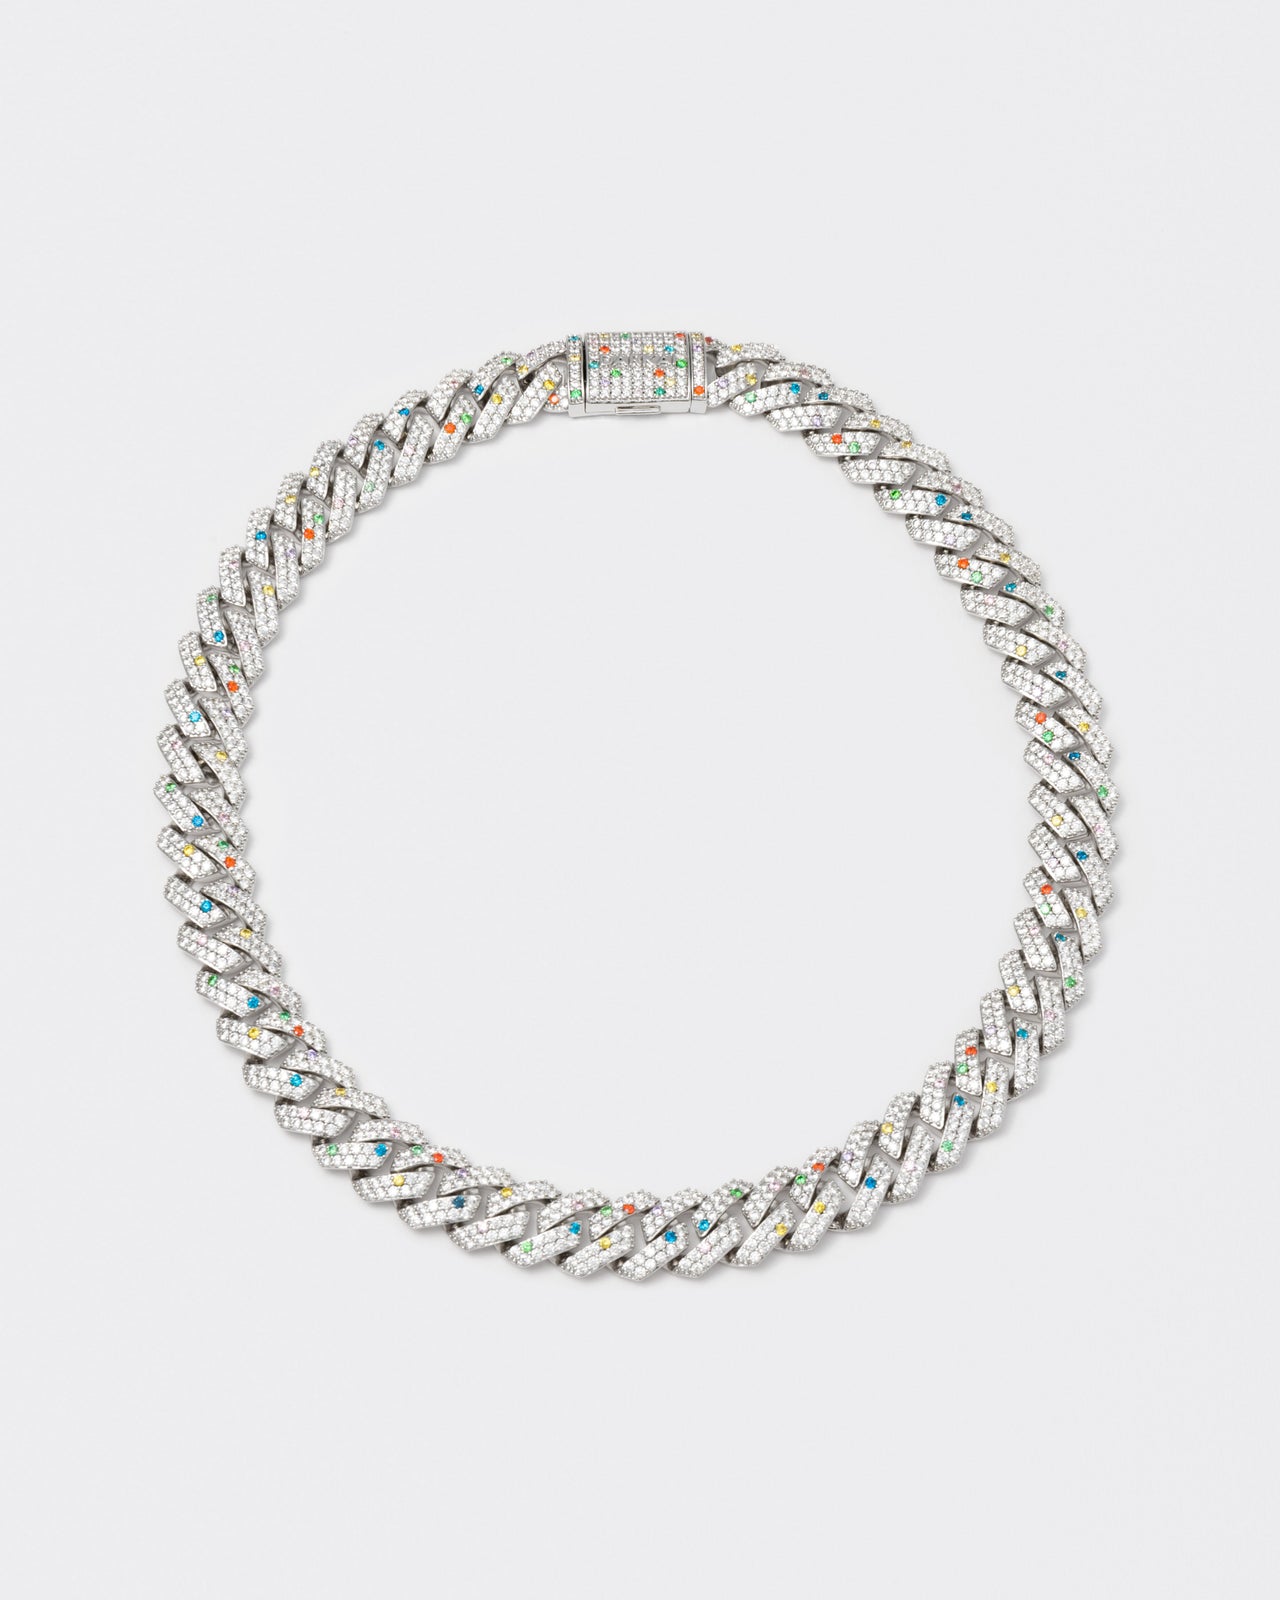 18k white gold coated prong chain necklace with hand-set micropavé stones in white, violet, orange red, green, golden yellow and topaz blue